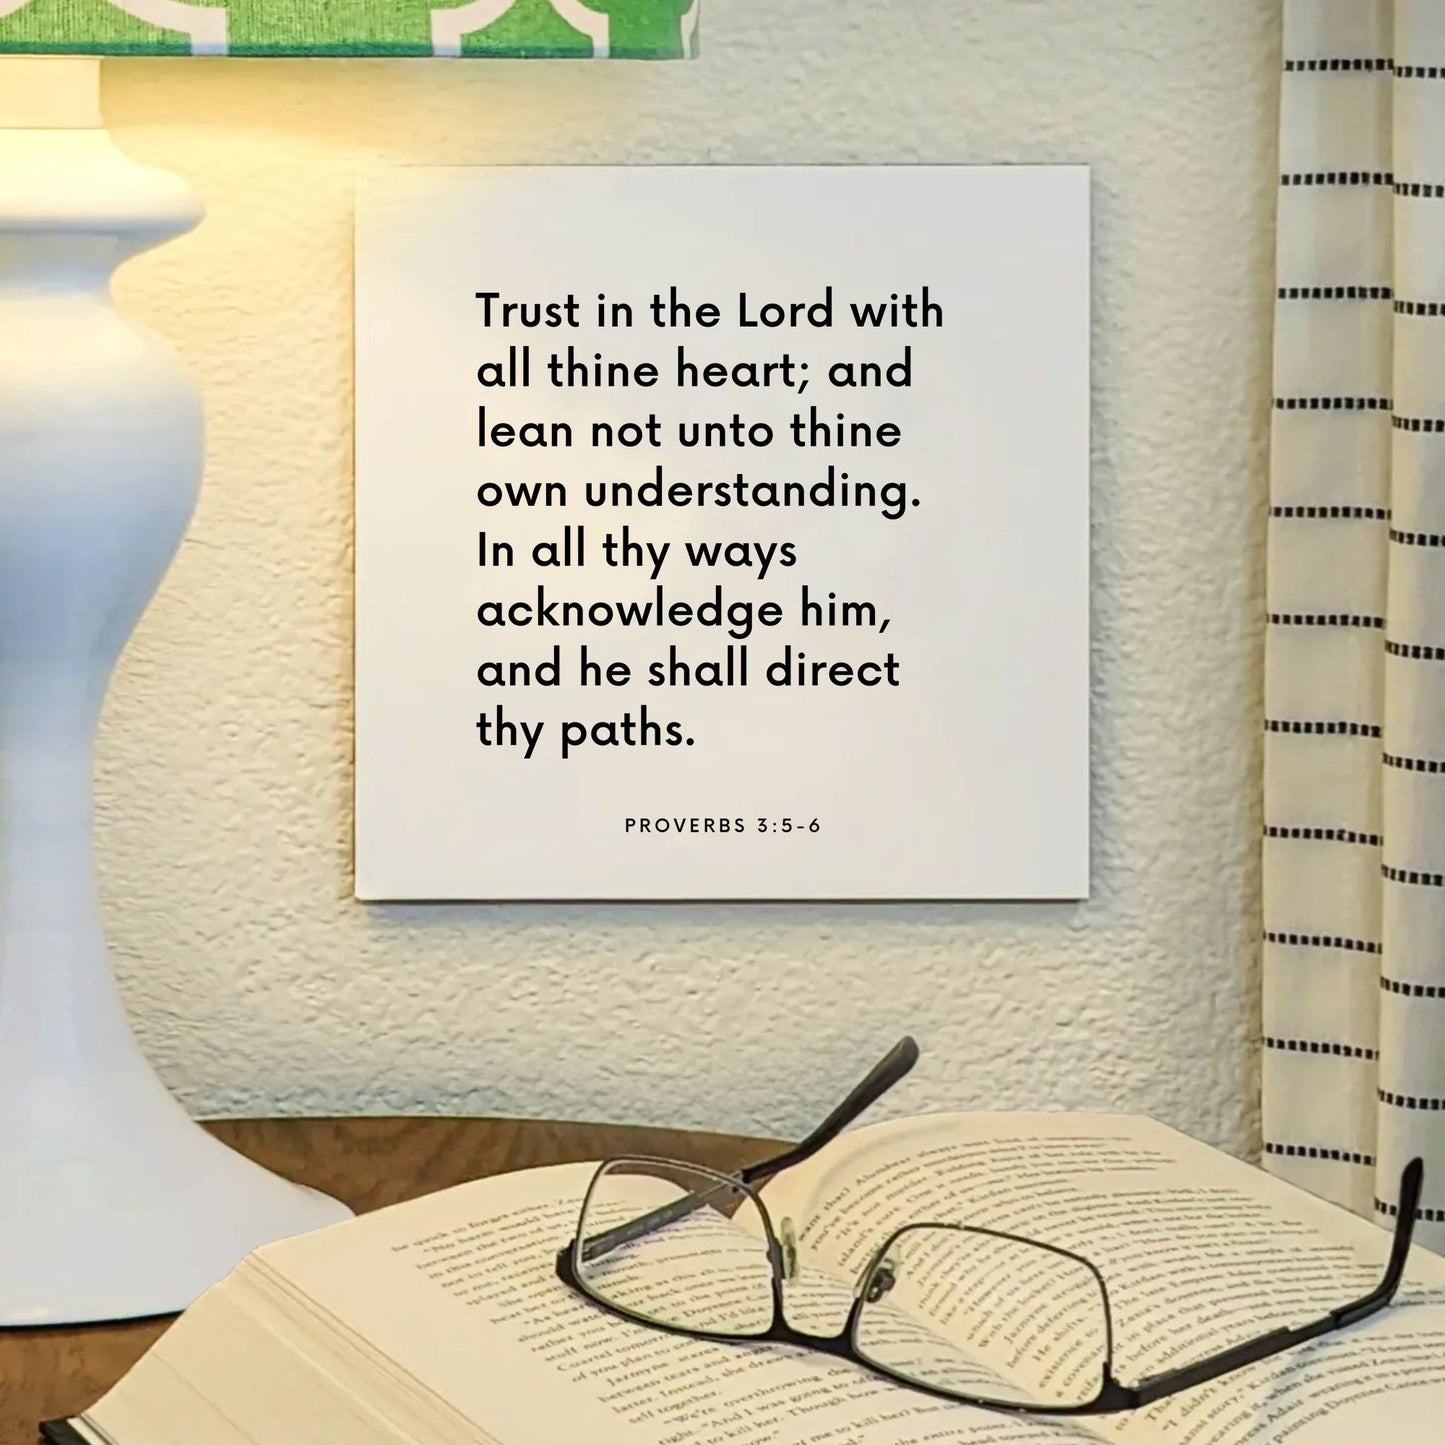 Lamp mouting of the scripture tile for Proverbs 3:5-6 - "Trust in the Lord with all thine heart"